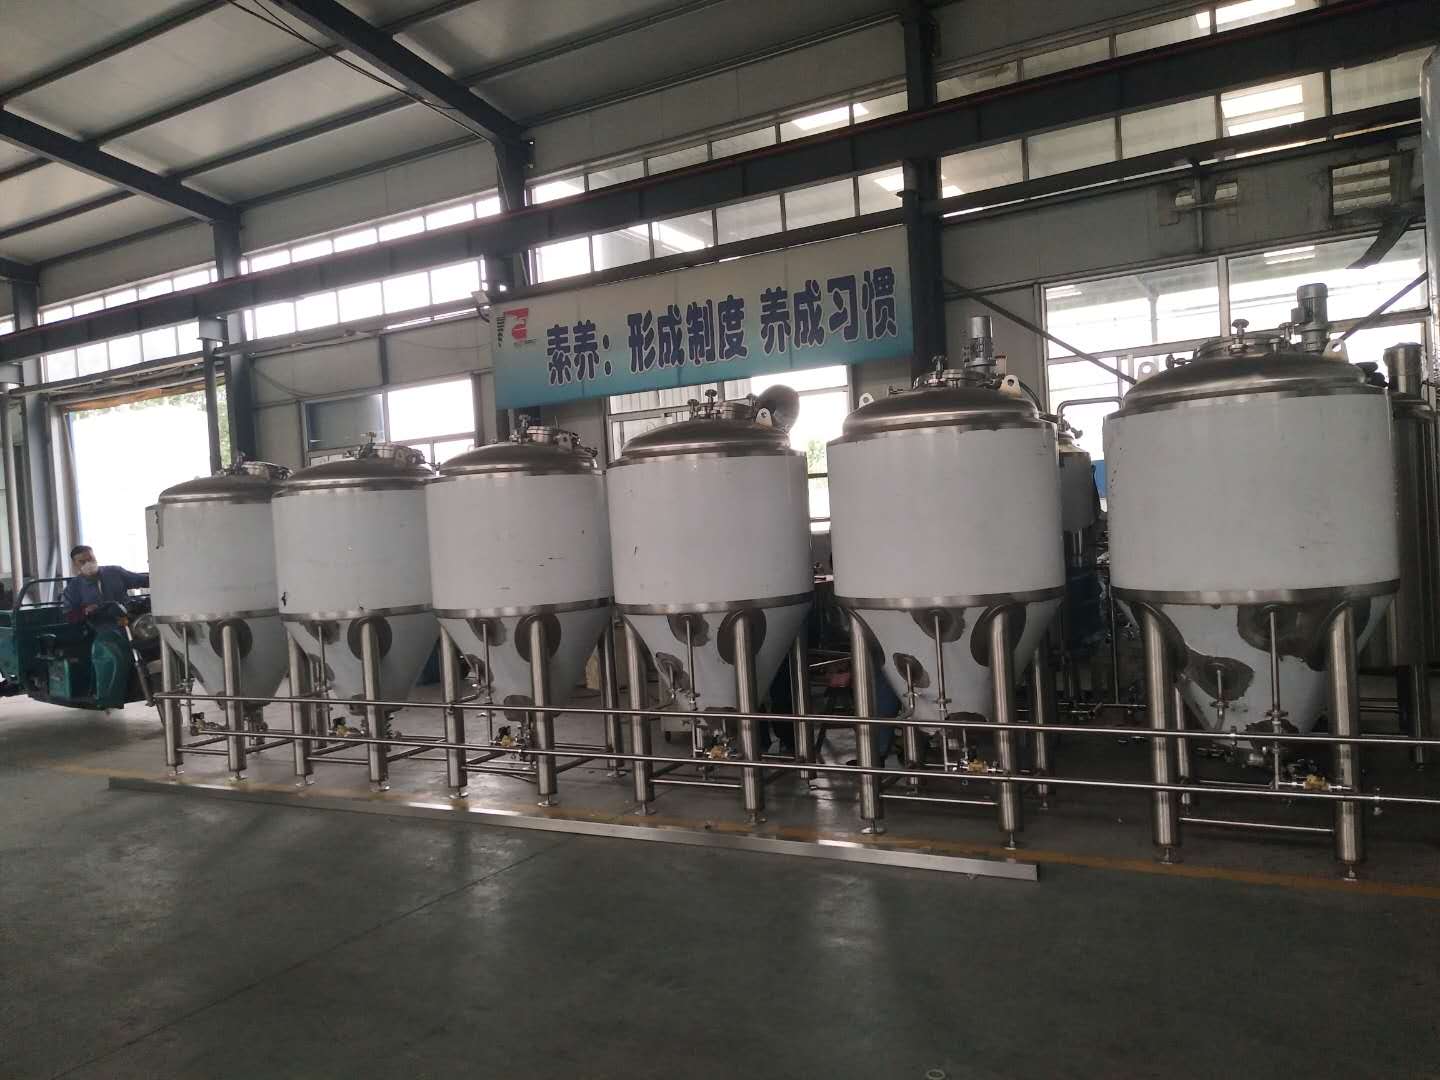   Commercial  mirror polishing fermentation tanks of SUS304 316 from China W5